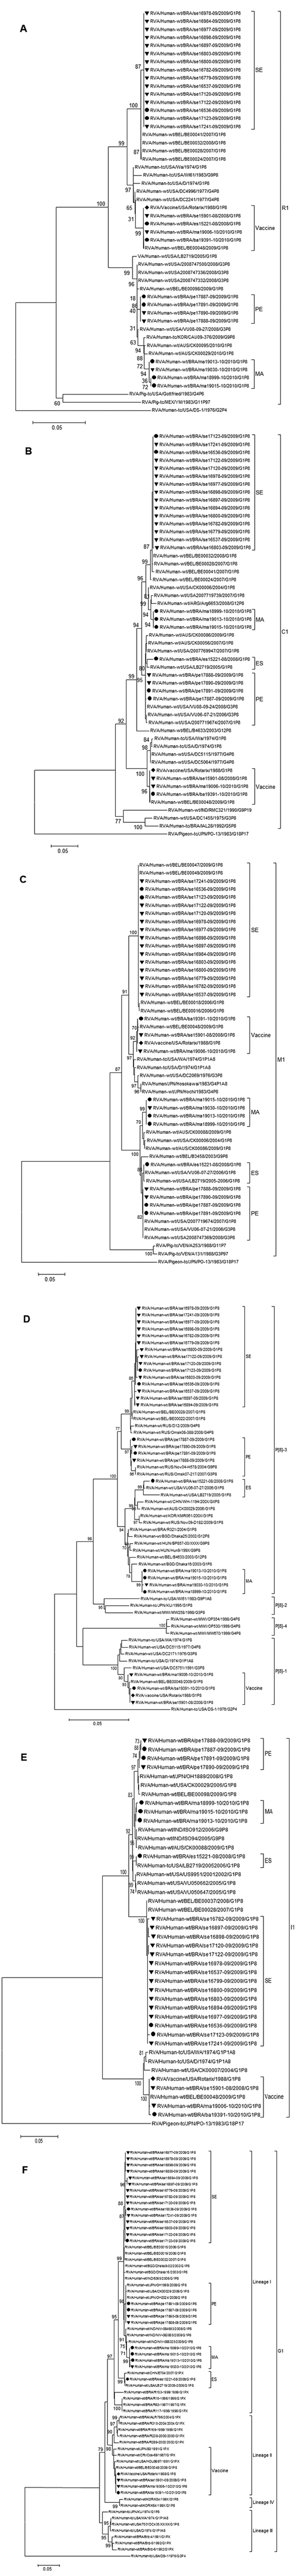 Phylogenetic analysis of nucleotide sequence of (A) VP1, (B) VP2, (C), VP3, (D) VP4, (E) VP6 and (F) VP7 genes of G1P[8] RVA samples collected in Brazil and described in this study. Filled circles indicate samples from non-vaccinated children and filled triangles vaccinated children. The Rotarix vaccine strain is indicated by a filled diamond. Bootstrap values above 70%, estimated with 2,000 pseudoreplicate datasets, are indicated at each node. Only the genotype in which the strains under invest